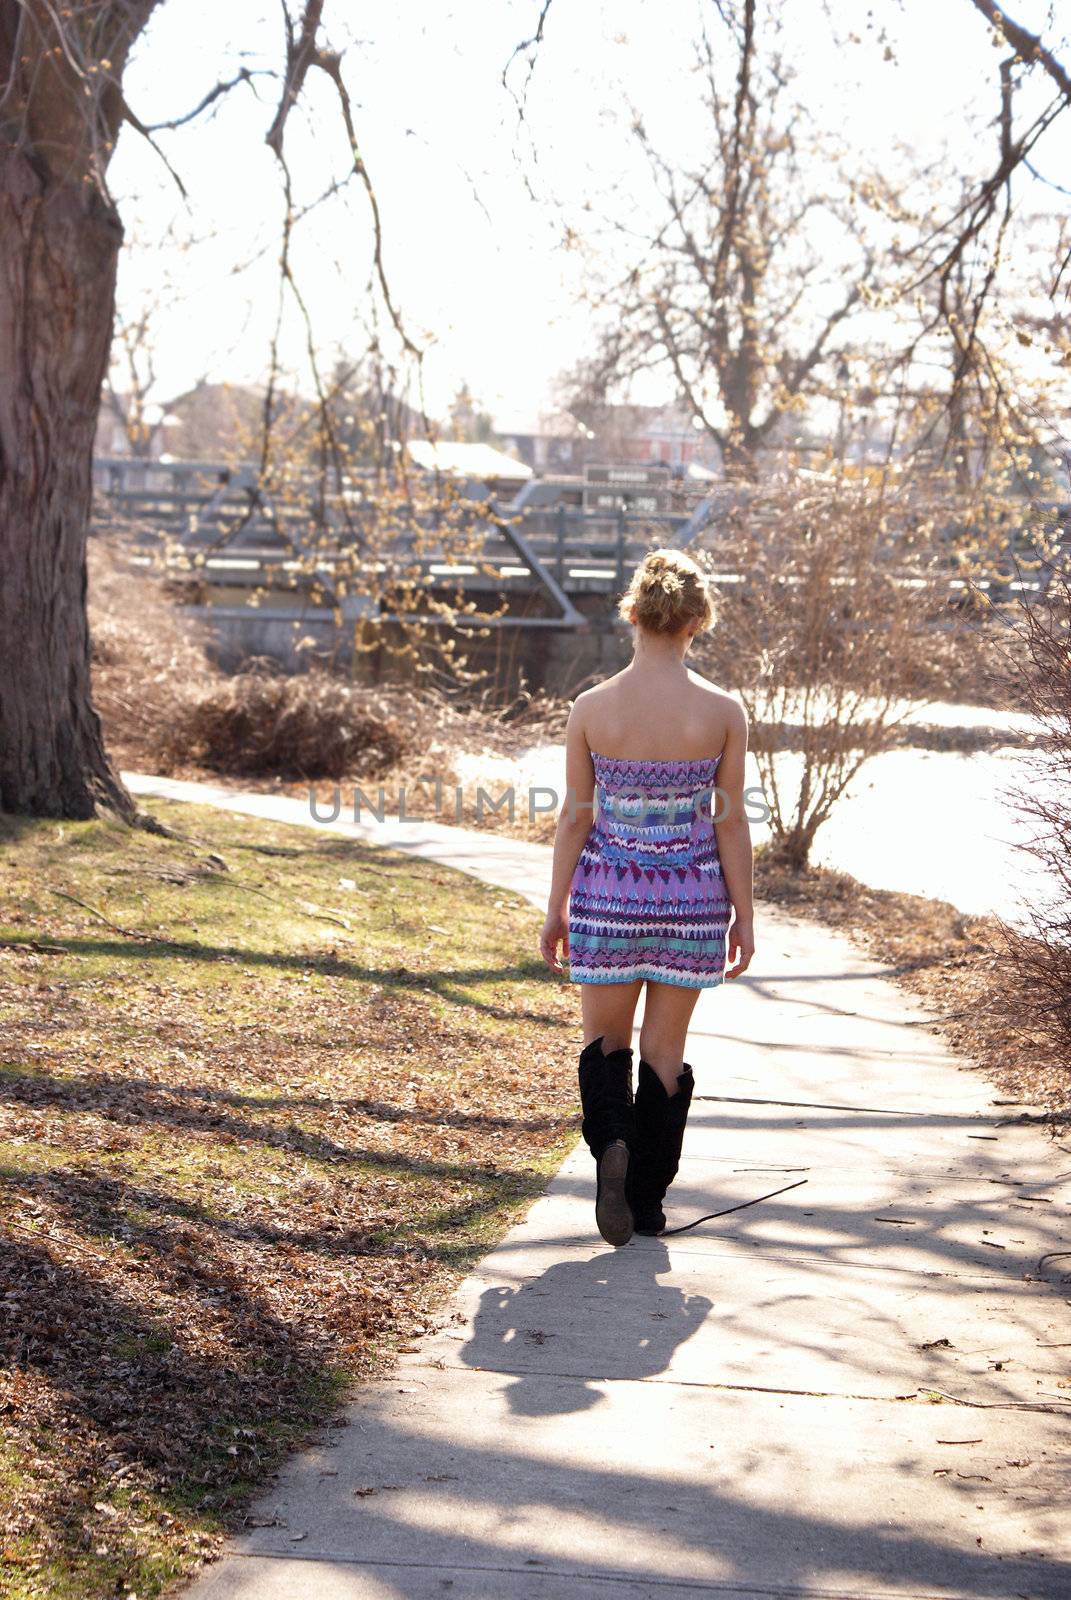 A young woman walks through the park near the river on this sunny spring day.